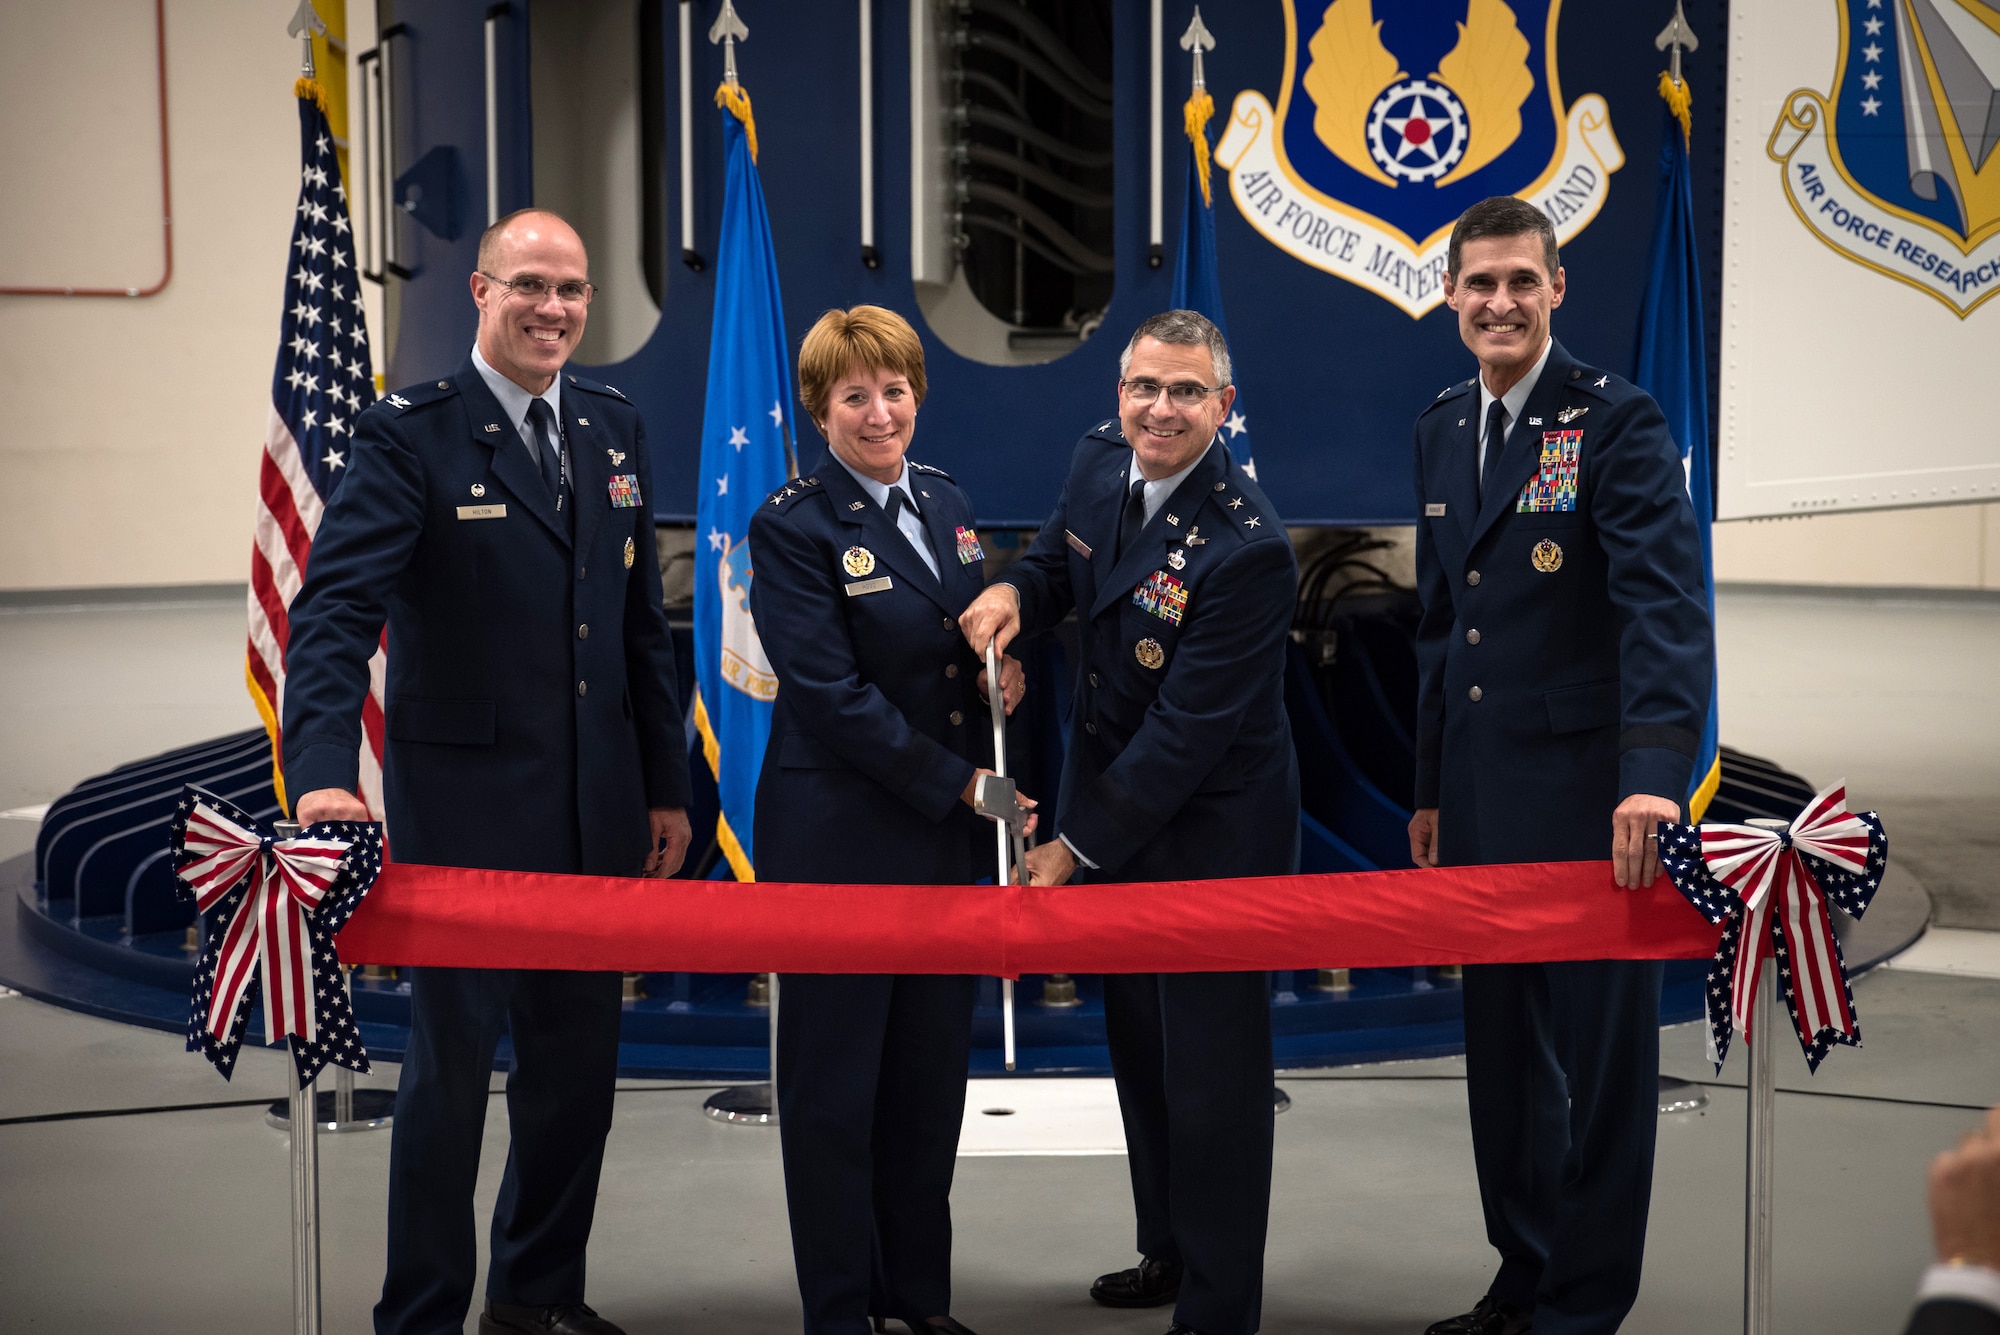 Col. Alden Hilton, United States Air Force School of Aerospace Medicine commander, Lt. Gen. Dorothy Hogg, Air Force Surgeon General, Maj. Gen. William Cooley, Air Force Research Laboratory commander, and Brig. Gen. Mark Koeniger, 711th Human Performance Wing commander, pose just before cutting the ribbon during a ceremony Aug. 2 in USAFSAM to mark the full operational capability of the Department of Defense’s only human-rated centrifuge. (U.S. Air Force photo by Richard Eldridge)